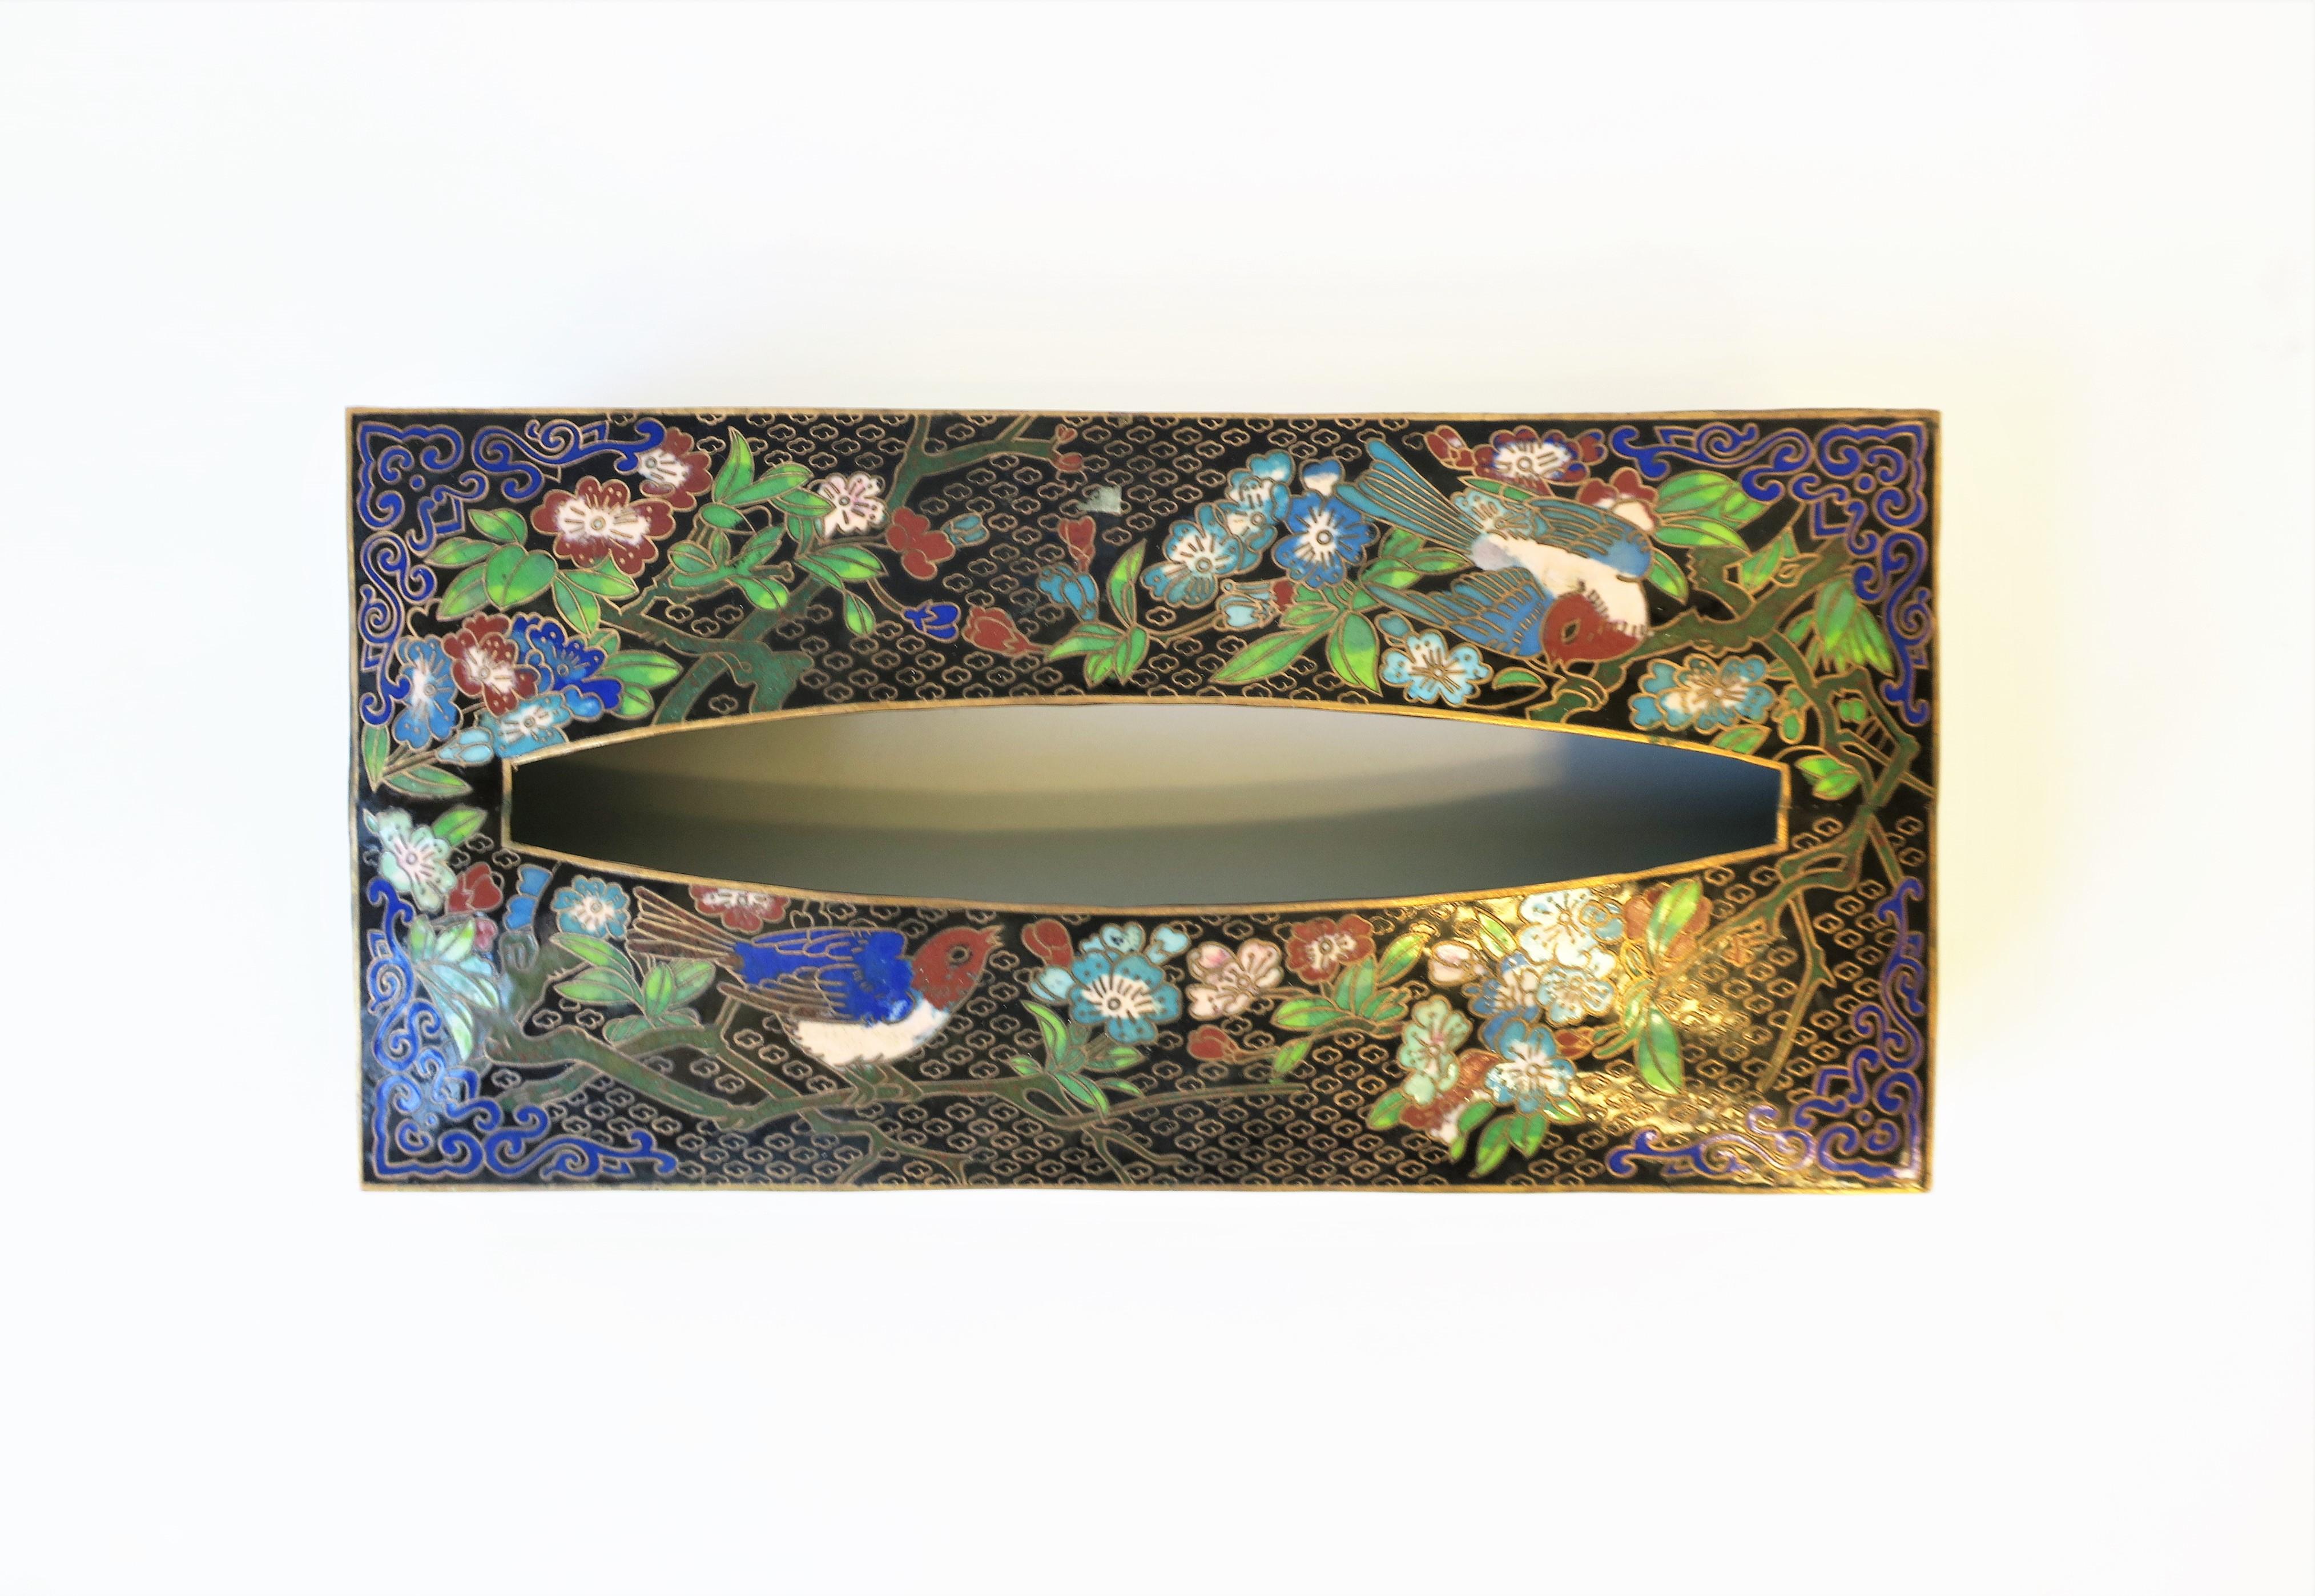 A beautiful brass and cloisonné enamel tissue box holder cover with birds and flowers, circa 1970s, China. Colors include: gold brass, black, cobalt blue, sapphire blue, light blue, white, emerald green, greens, pink, and red burgundy enamel hues.